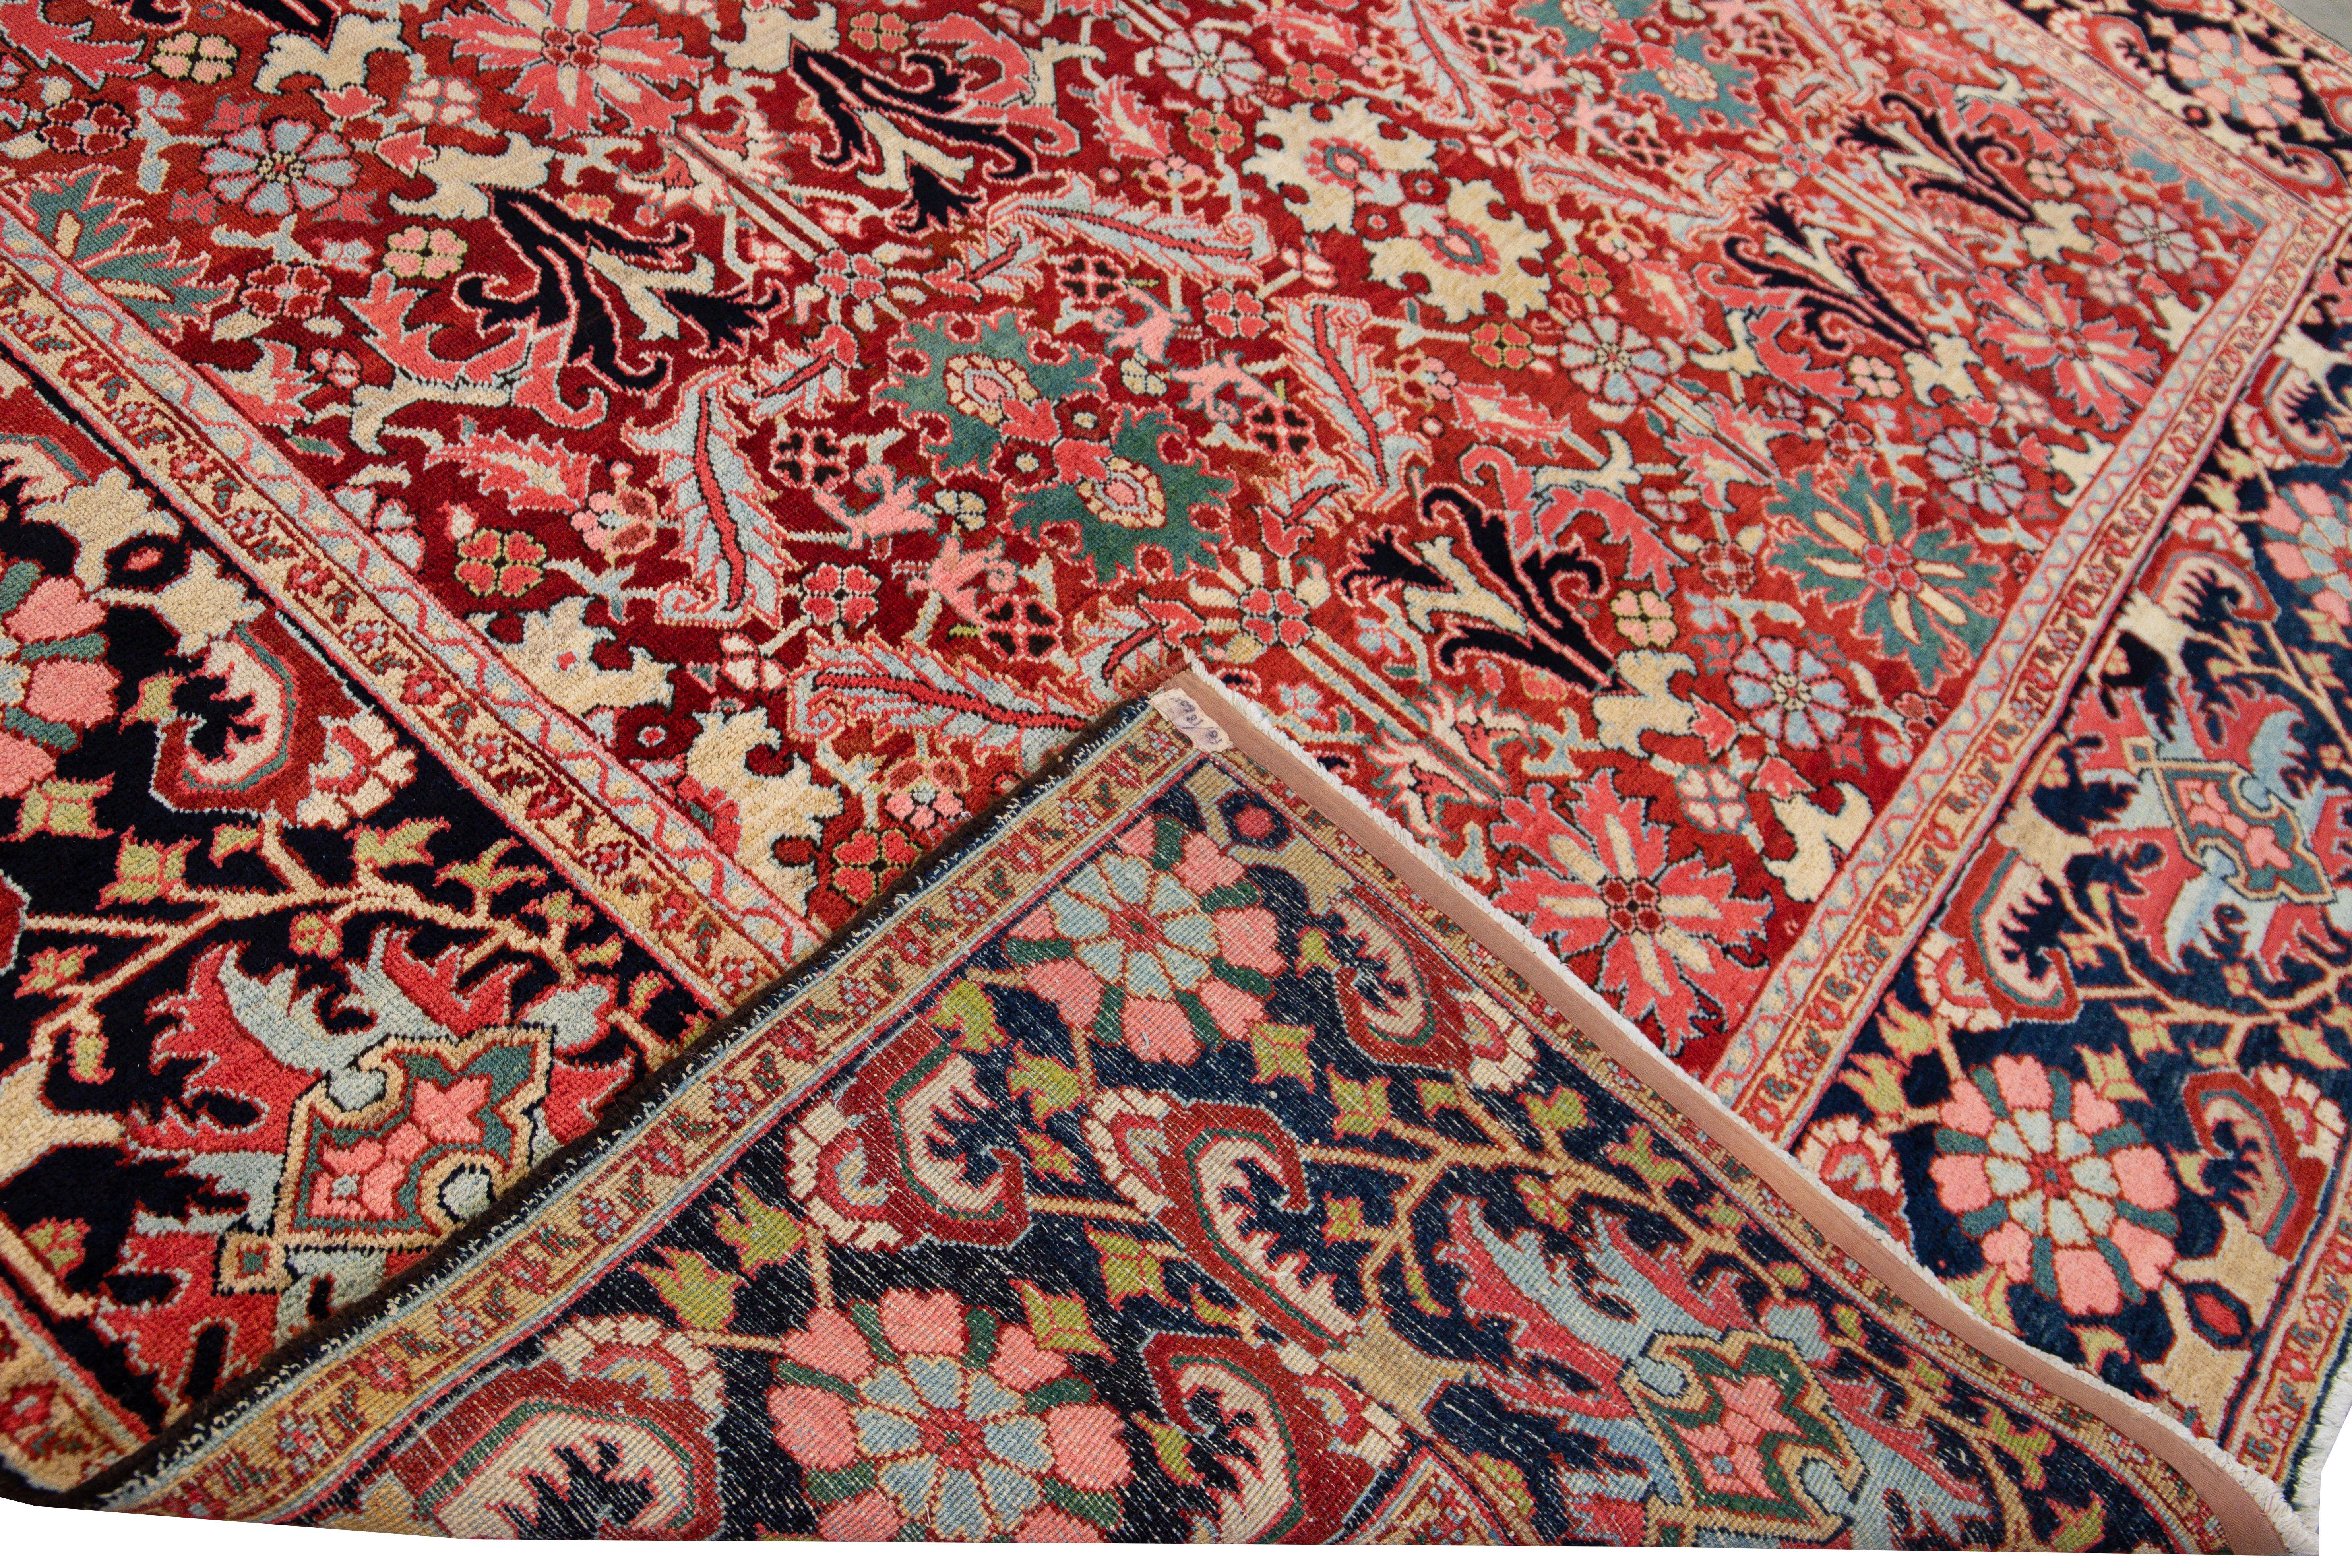 Beautiful antique Persian Heriz hand-knotted wool rug with a red field. This Serapi rug has a navy-blue frame and multi-color accents in an all-over gorgeous Tribal floral pattern design.

This rug measures: 12' x 18'3